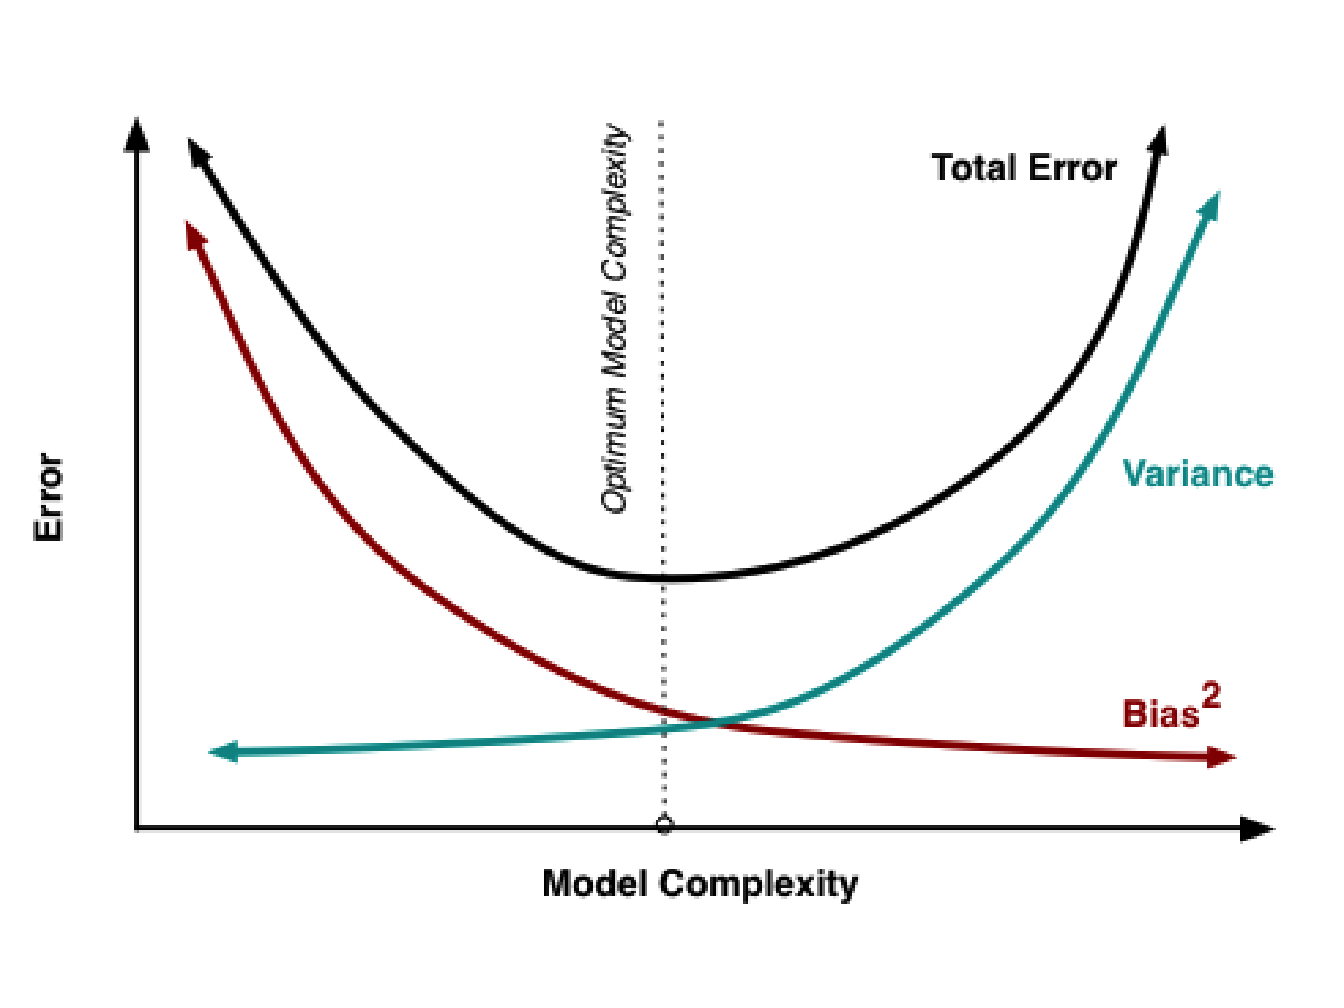 Bias and variance contribution to the total error. The bias (red curve) decreases as the model complexity increases unlike variance, which increases. The vertical dotted line shows the optimal model complexity, i.e. where the error criterion is minimized (image taken from http://scott.fortmann-roe.com/docs/BiasVariance.html).